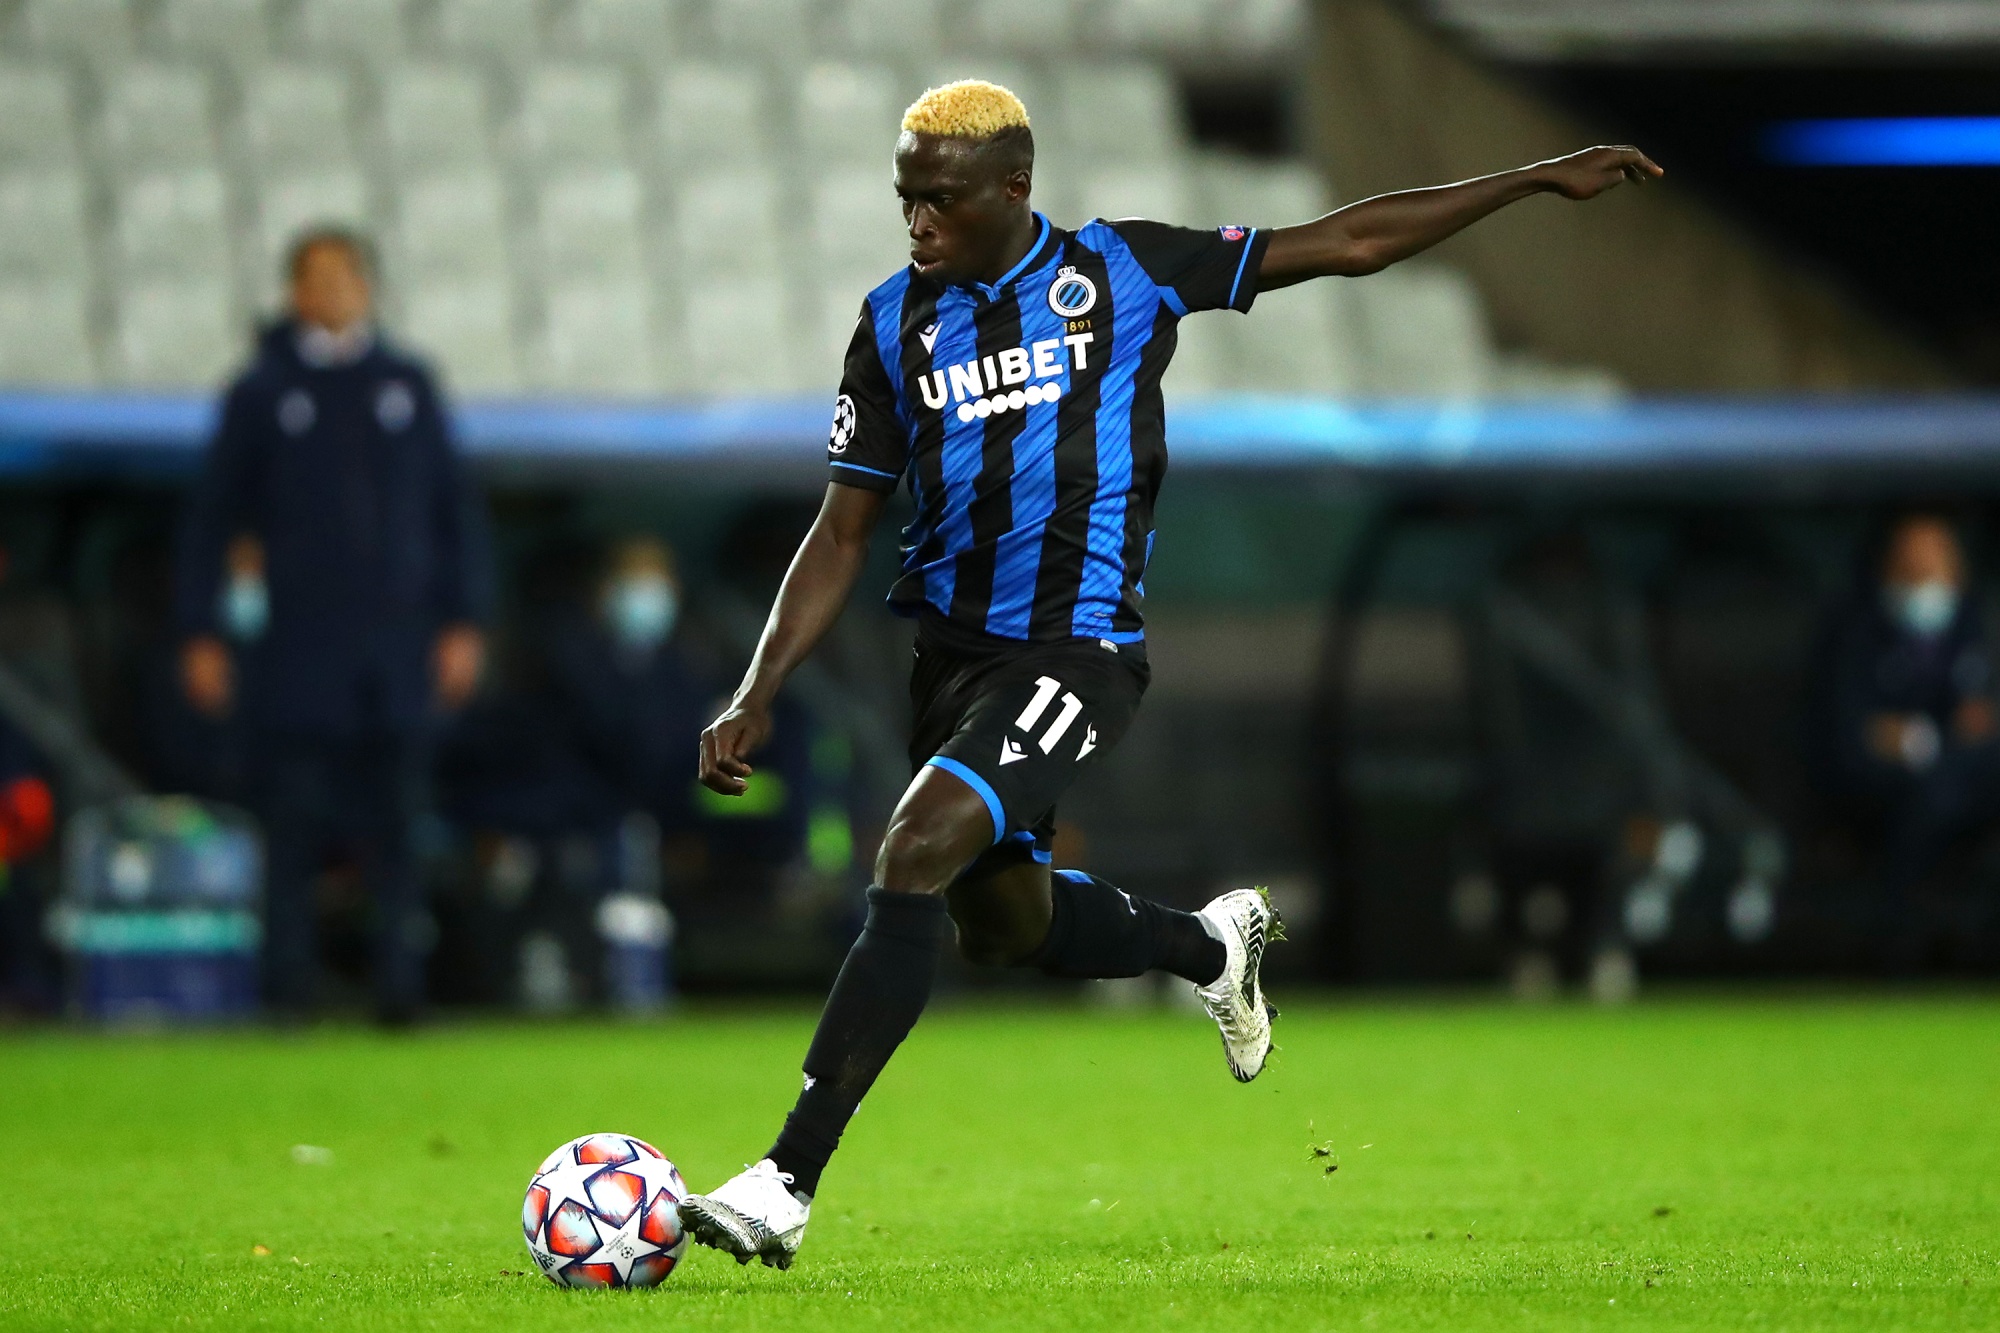 Club Brugge: The stars behind the surprising Champions League run